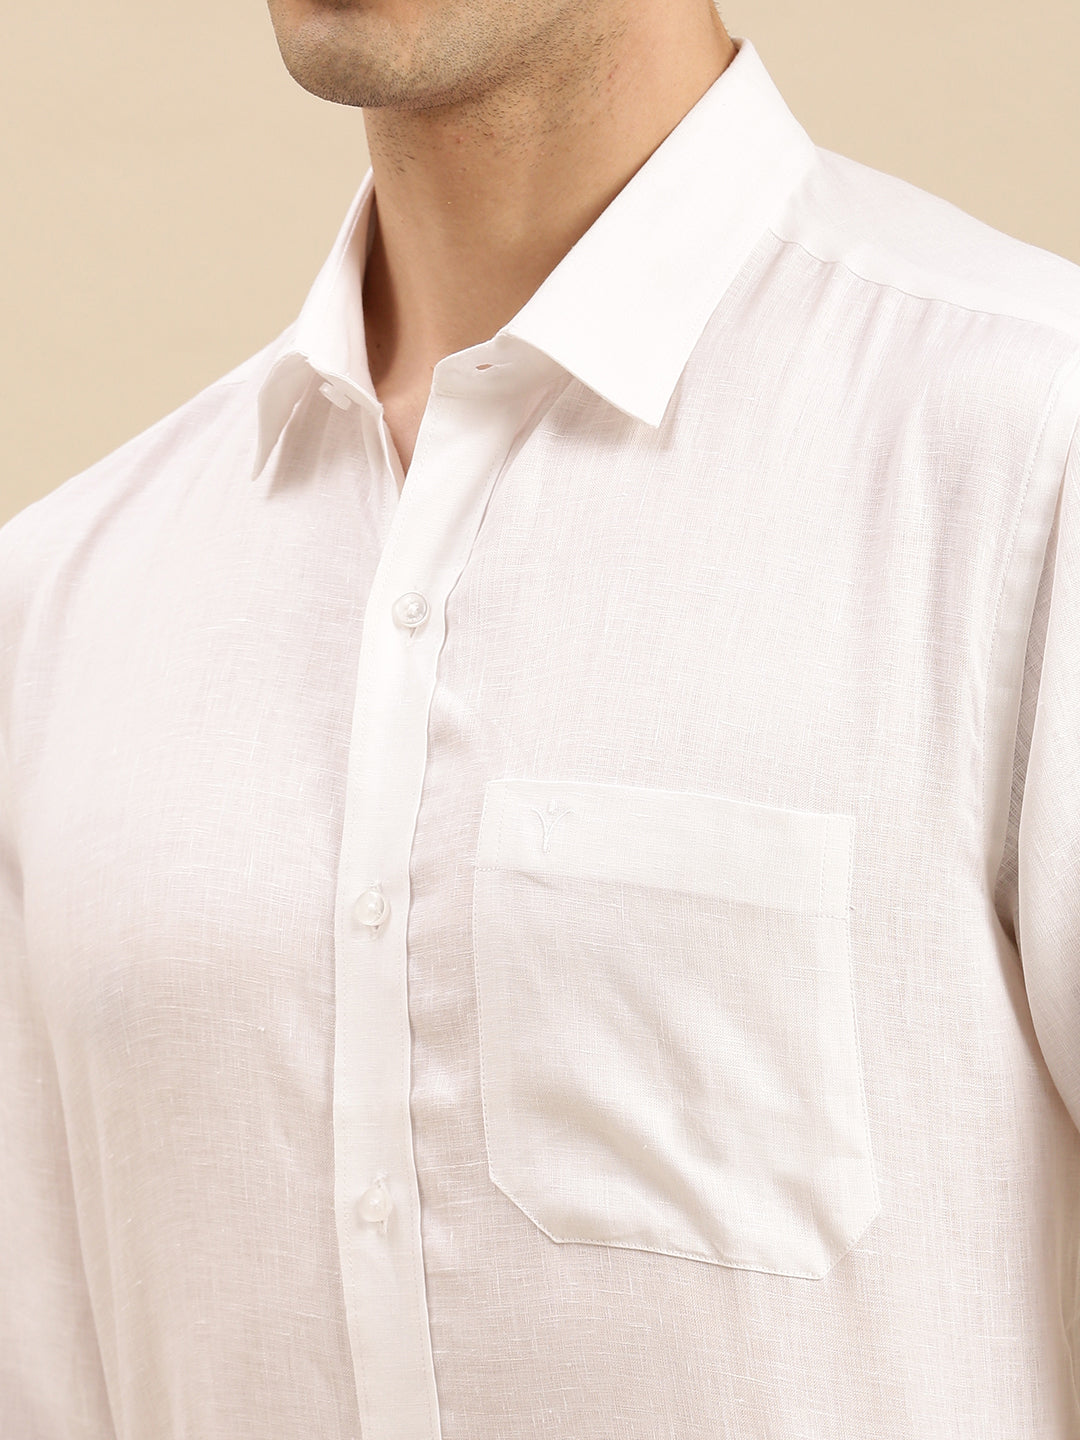 Mens Smart Fit 100% Cotton White Shirt Full Sleeves White Trend -Zoom view